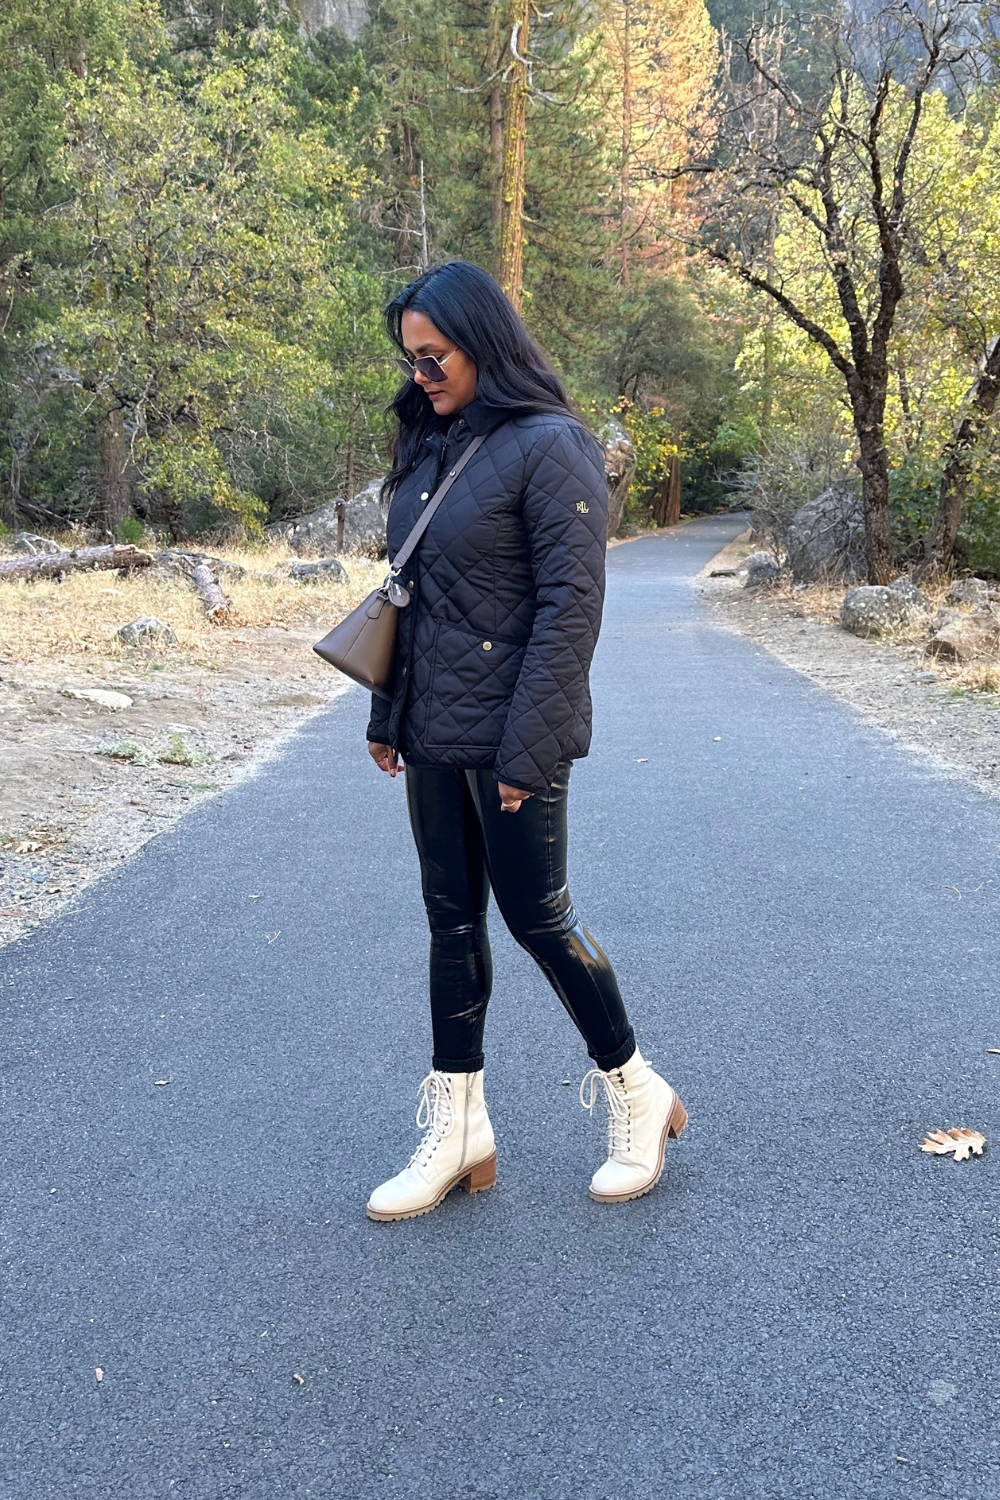 Cute Hiking outfit ideas - leggings and quilted coat